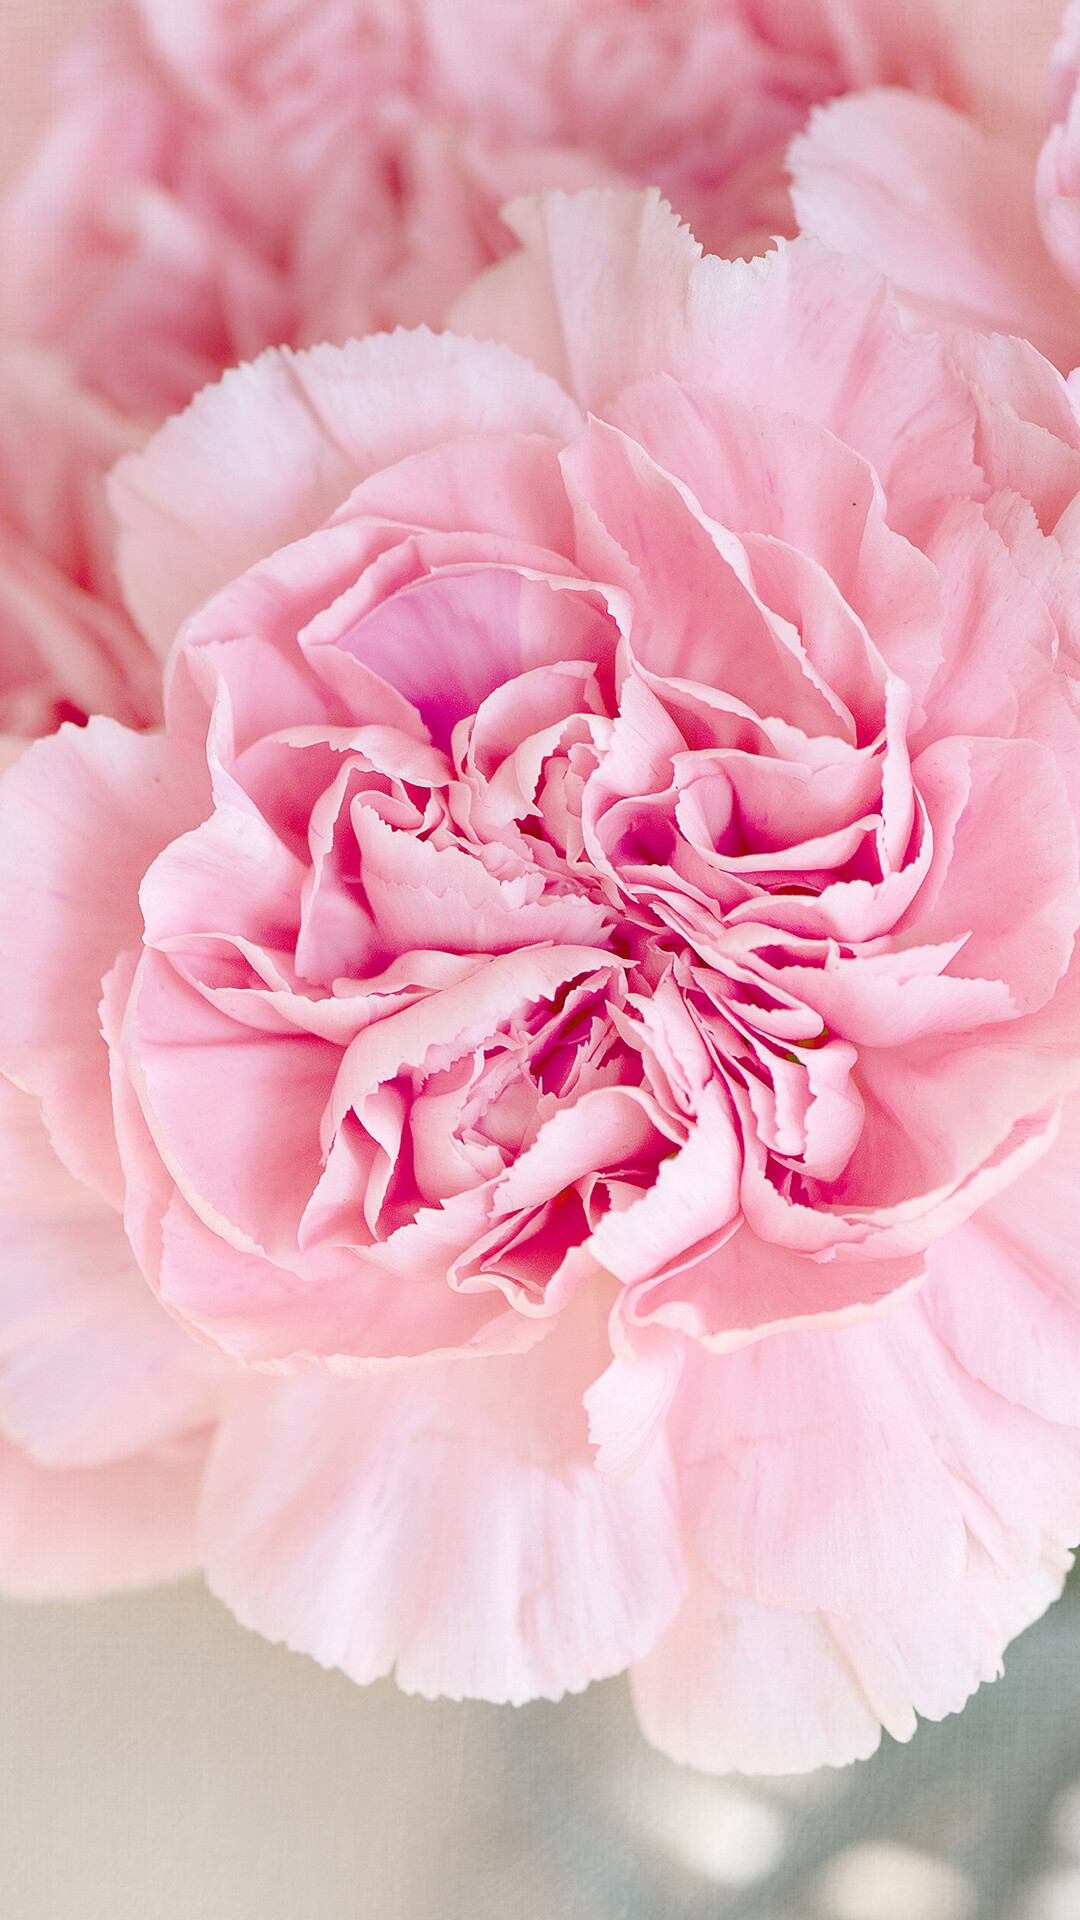 Carnation: A herbaceous flowering perennial that is commonly found in gardens, It is prized for its aroma, hardiness, and aesthetic appeal. 1080x1920 Full HD Wallpaper.